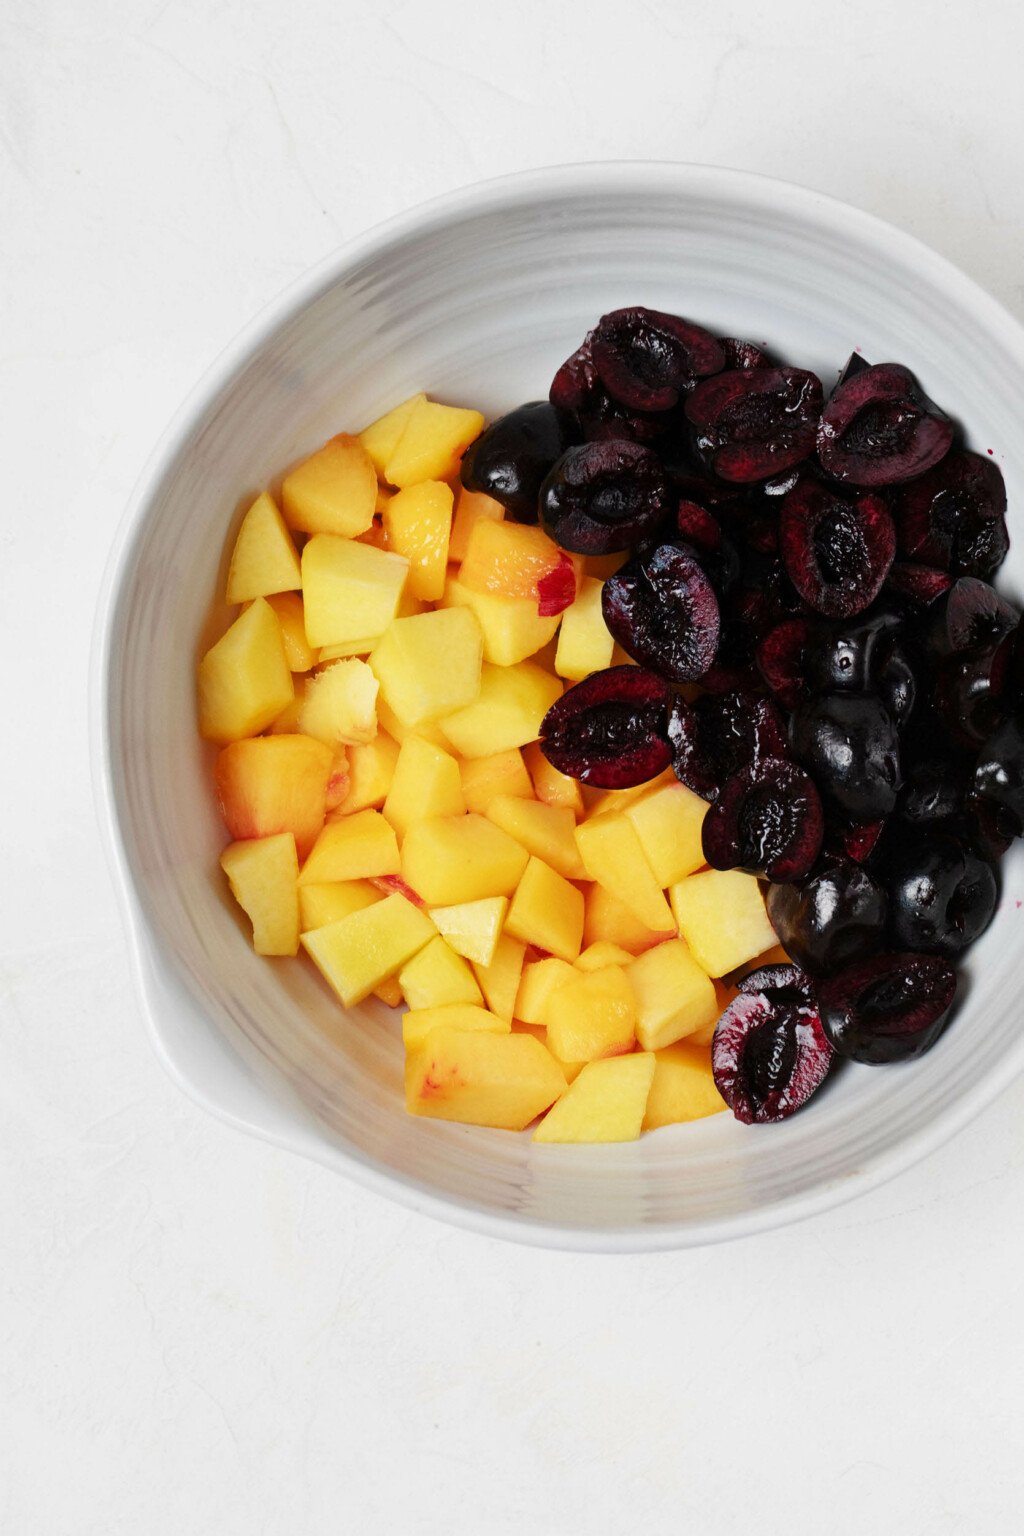 A large, white mixing bowl is filled with chopped yellow peaches and dark, sweet red cherries.